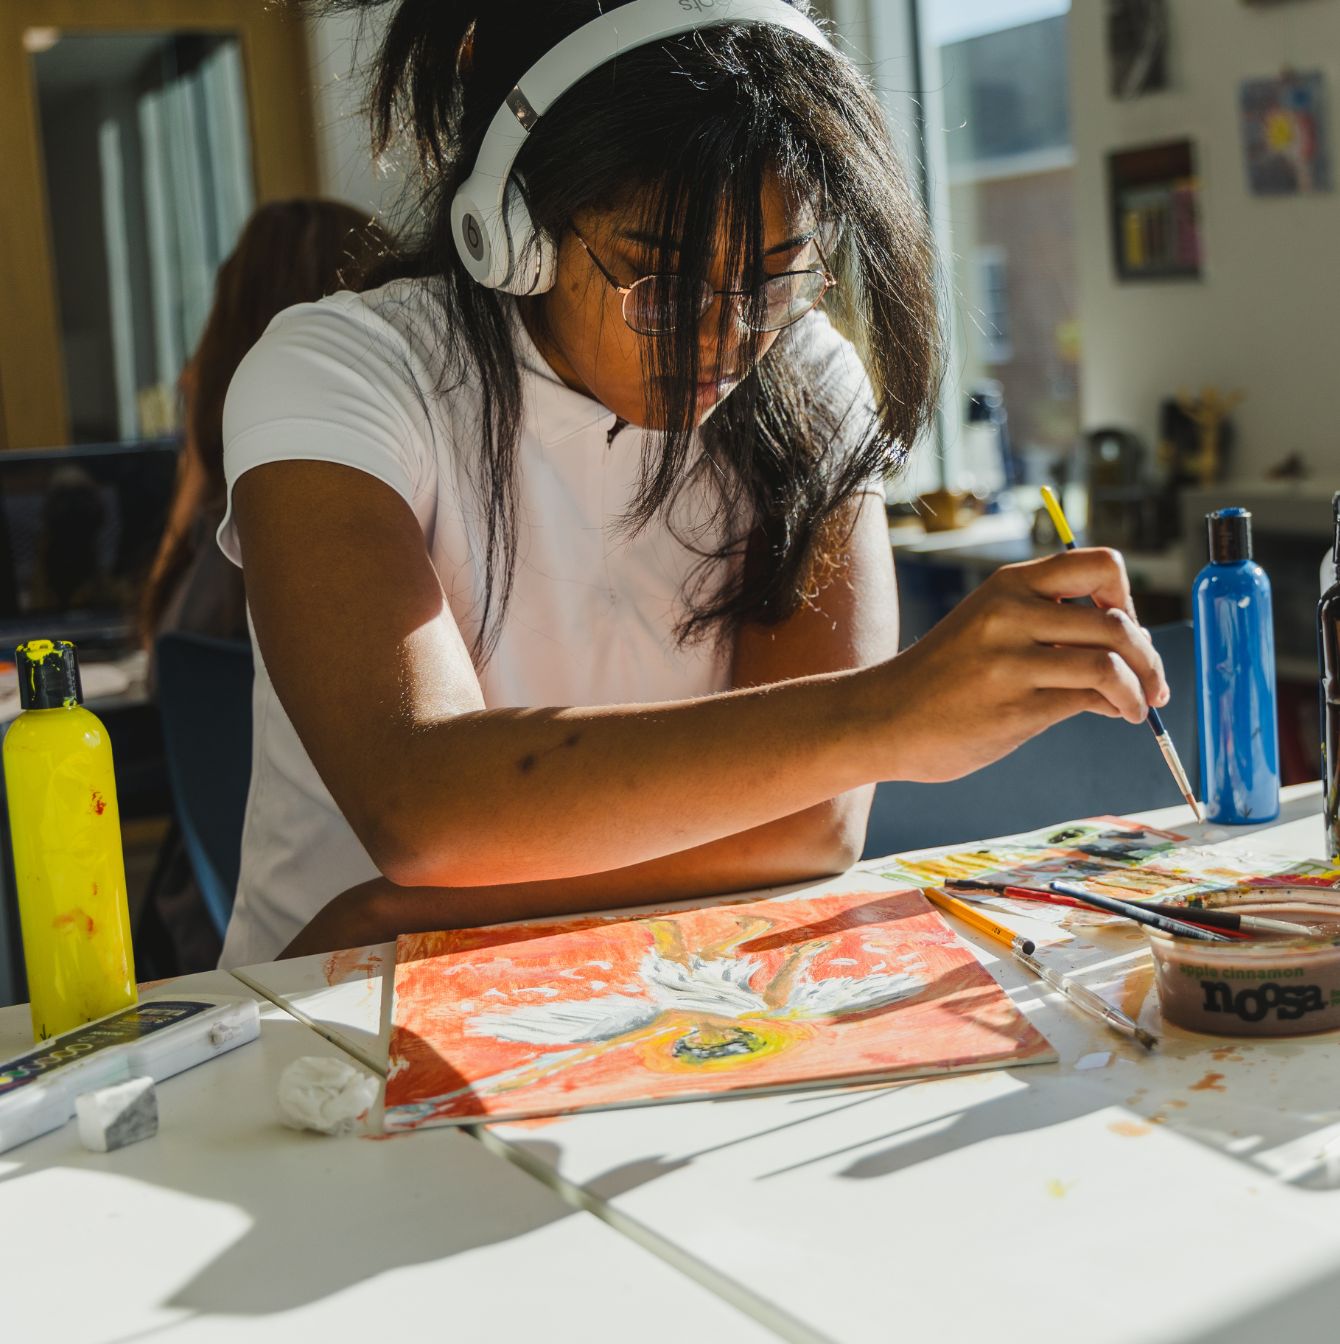 An attentive student artist is deeply focused on painting a colorful canvas in a sunlit art studio, surrounded by vibrant paint bottles and the inspiration of a bright creative space.